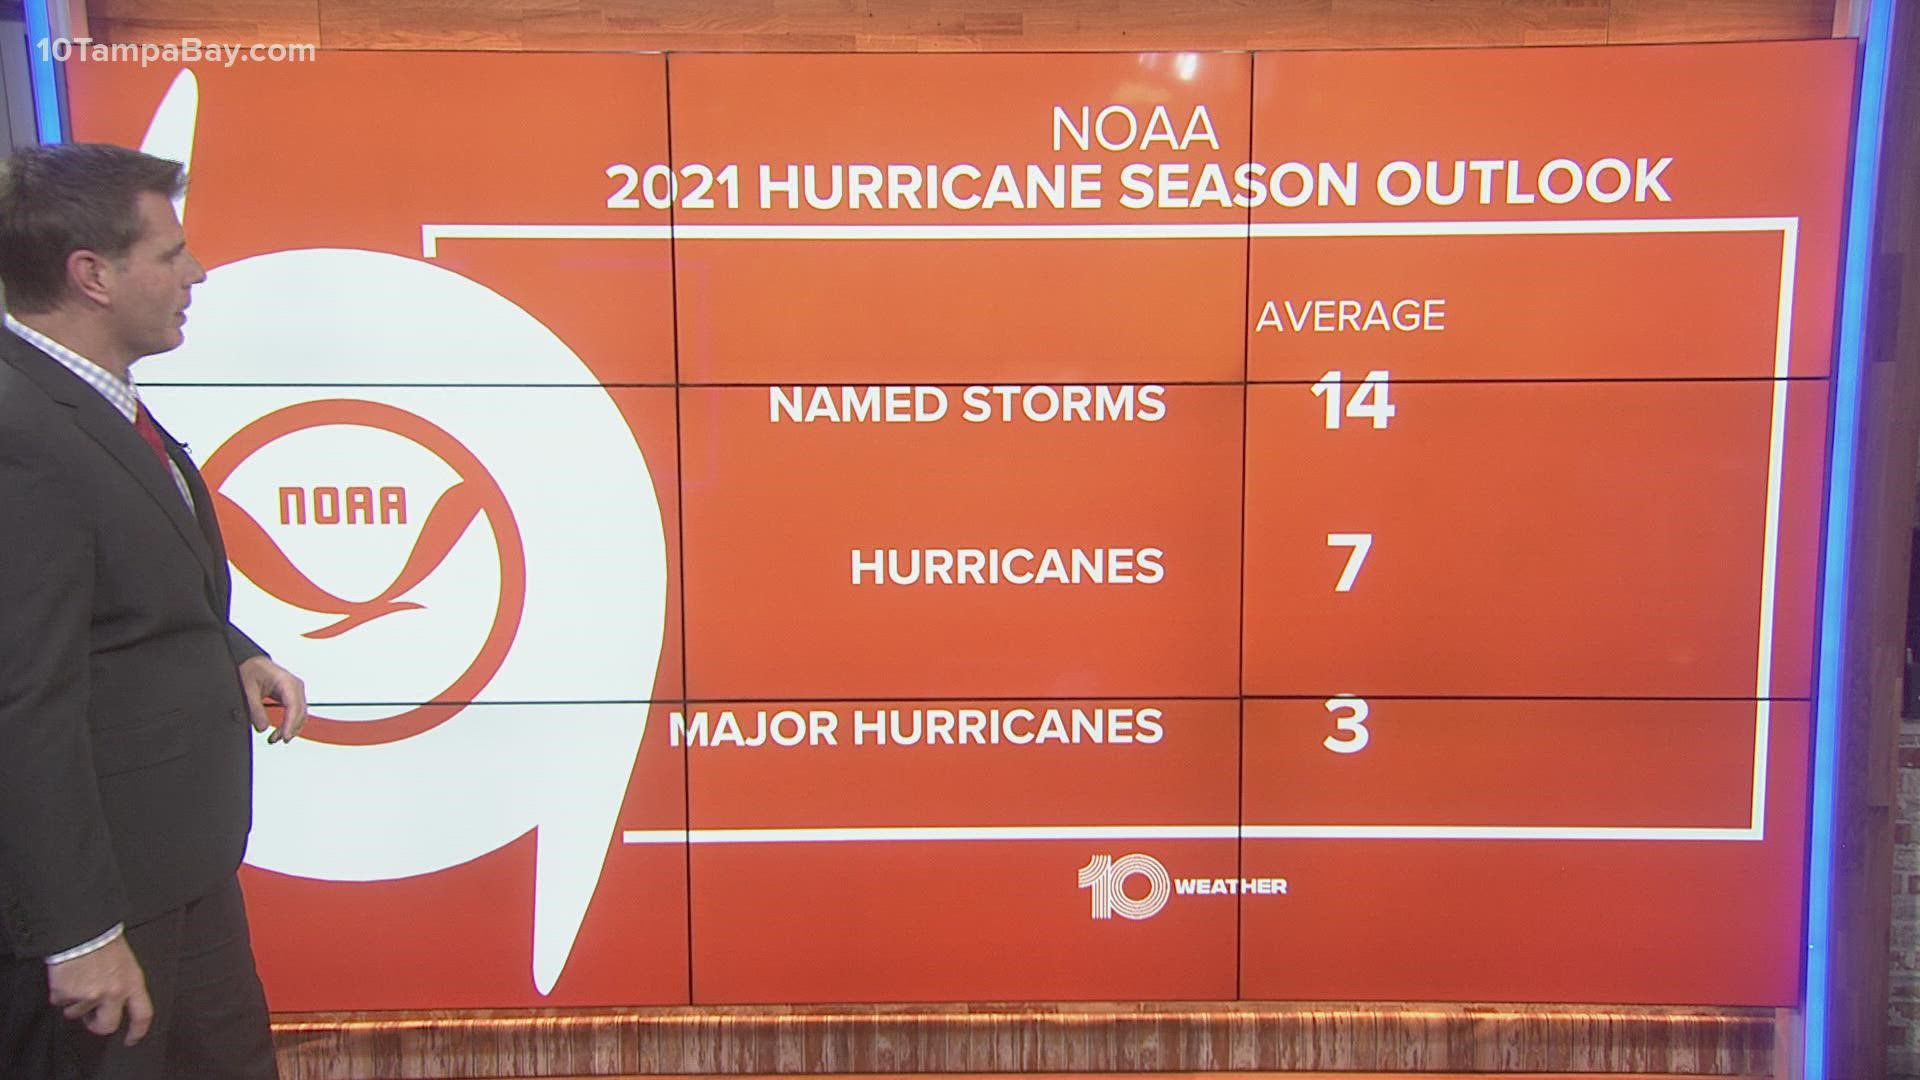 A total of 15-21 named storms, which include 7-10 hurricanes, are forecast.